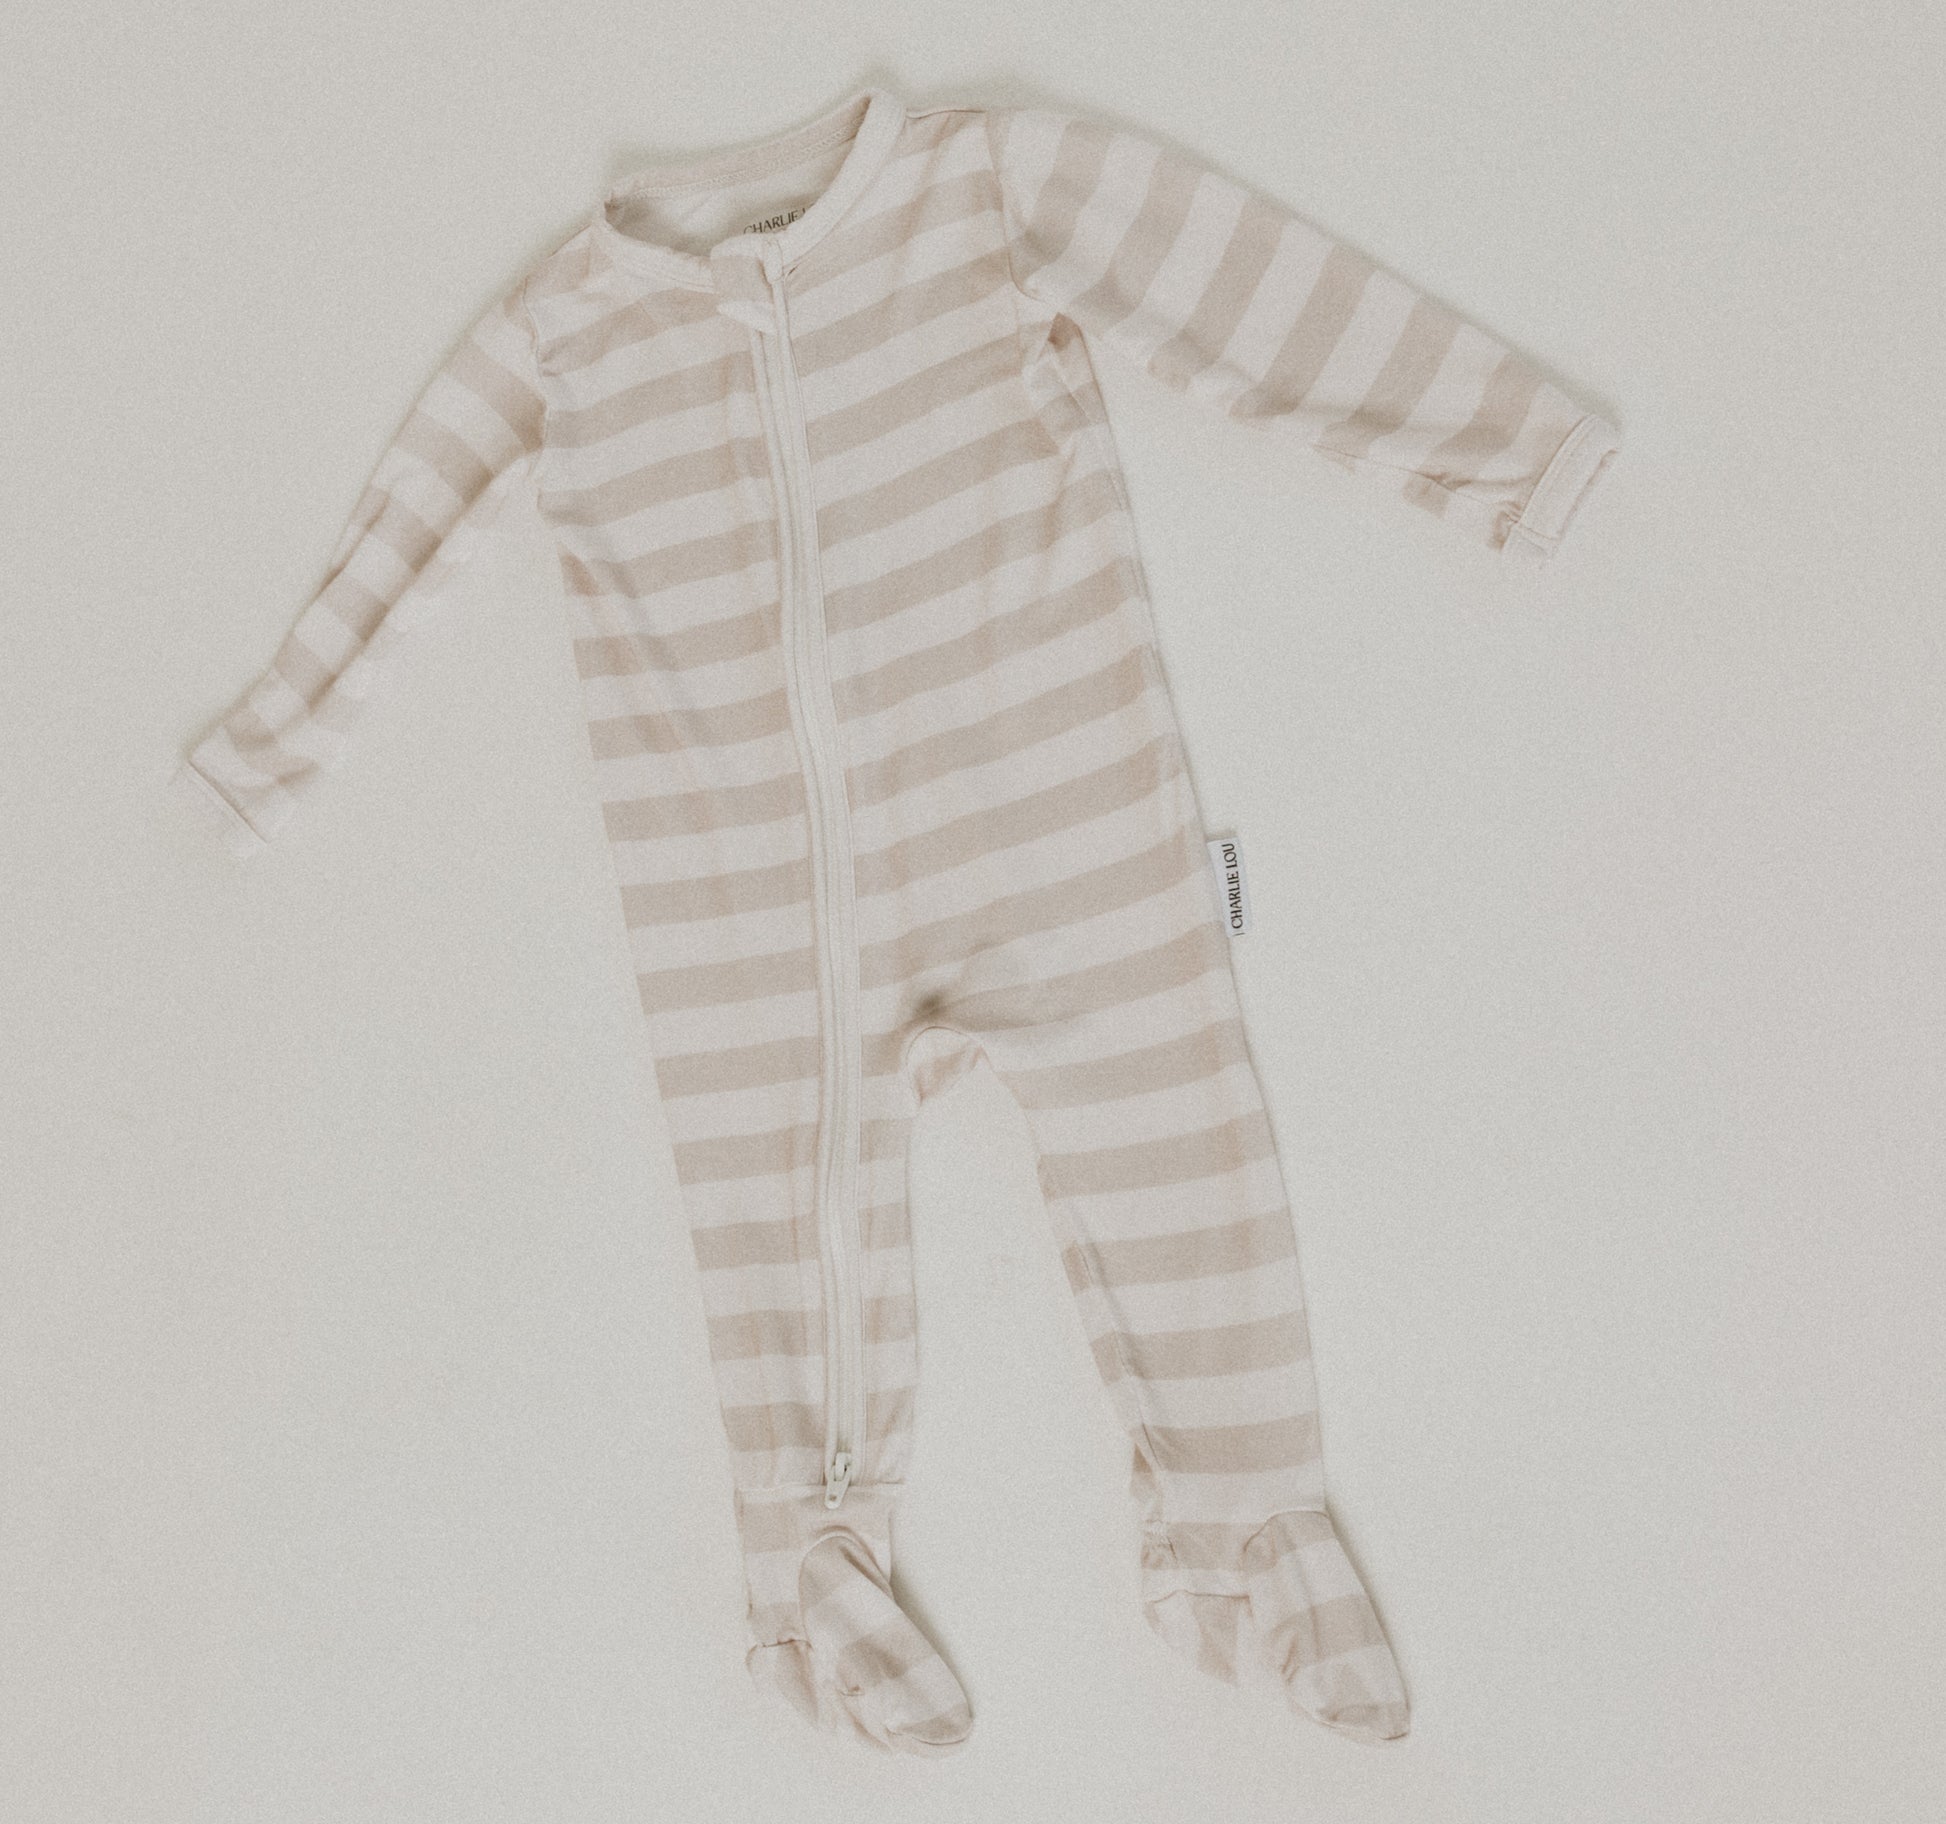 Gender neutral striped bamboo footed pajamas with double zipper.